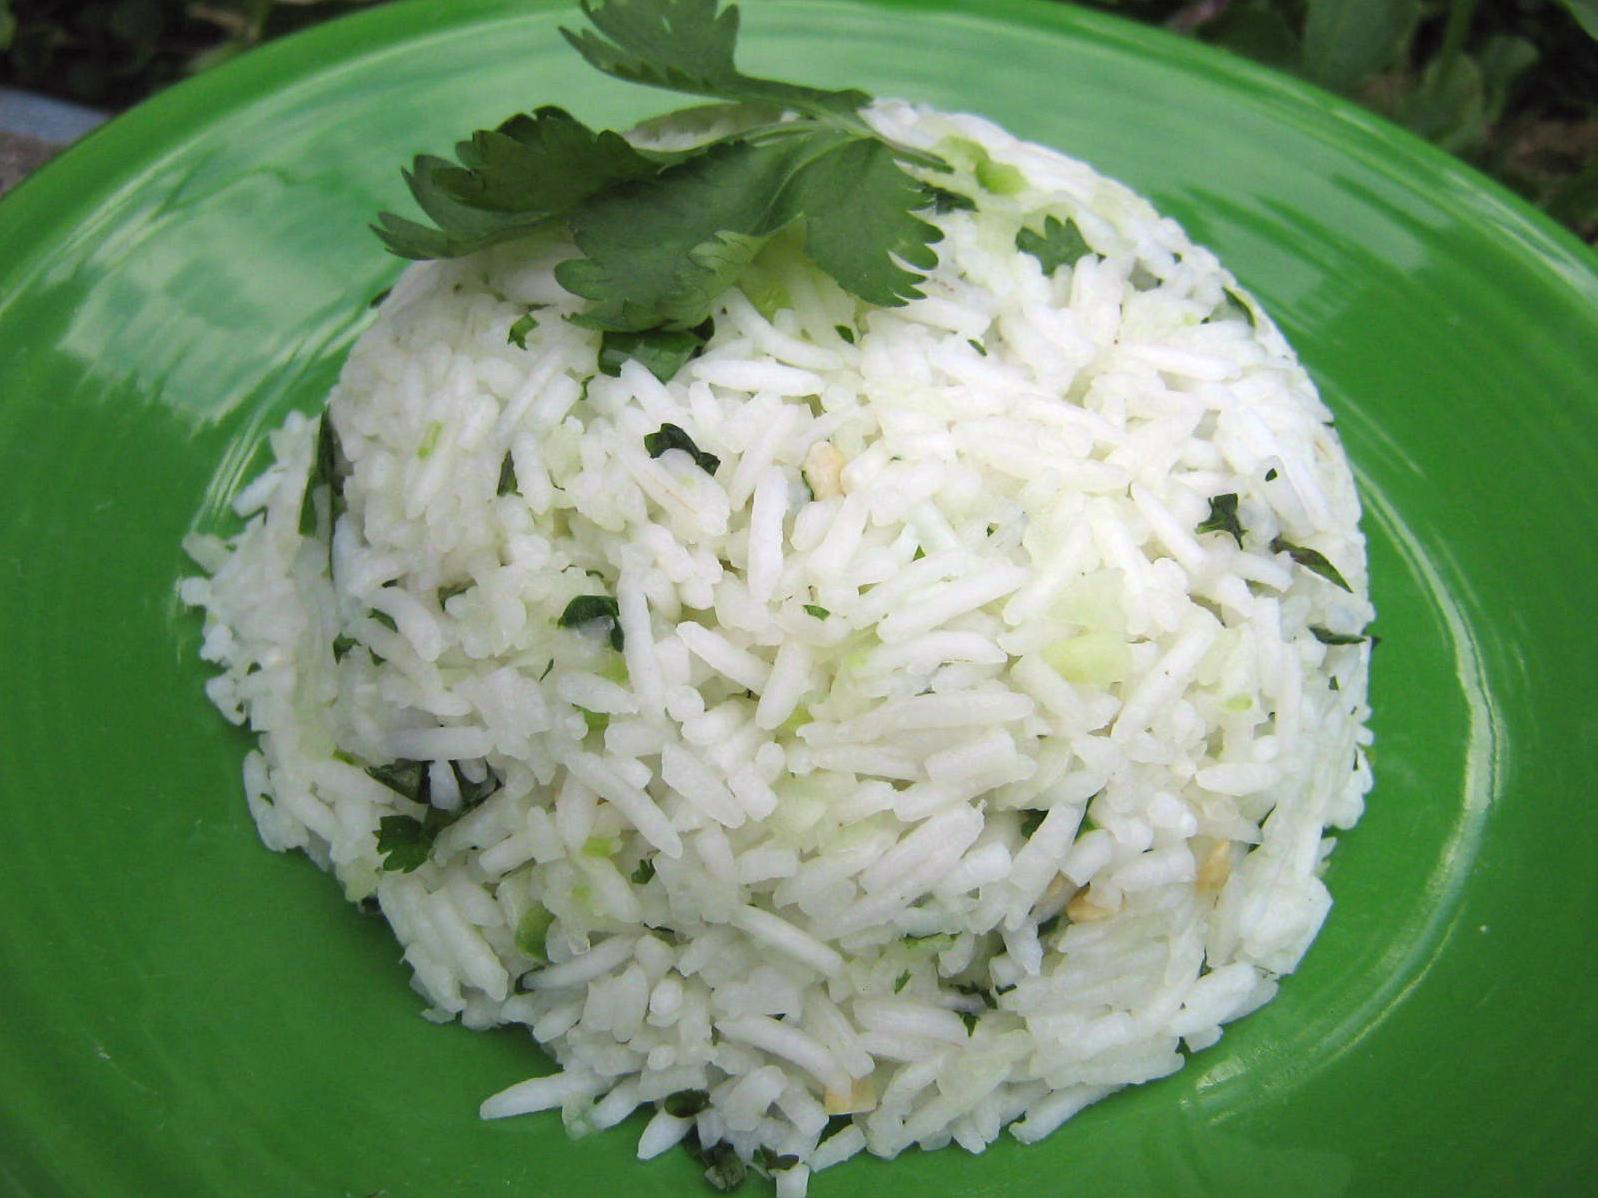  Get ready to impress your guests with this beautiful and flavorful rice dish.